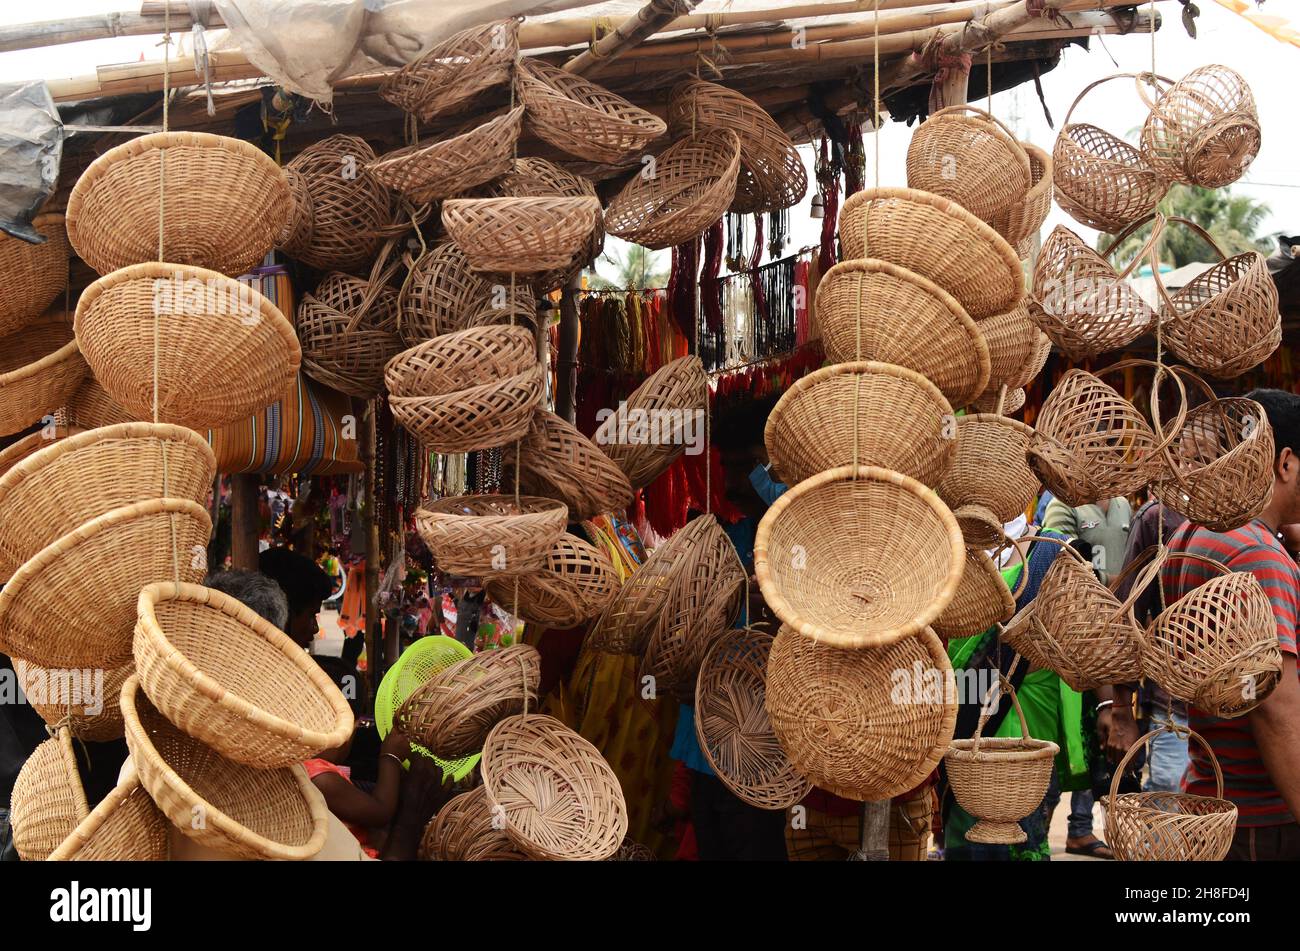 A variety of handicrafts made of bamboo such as baskets, flower baskets Stock Photo